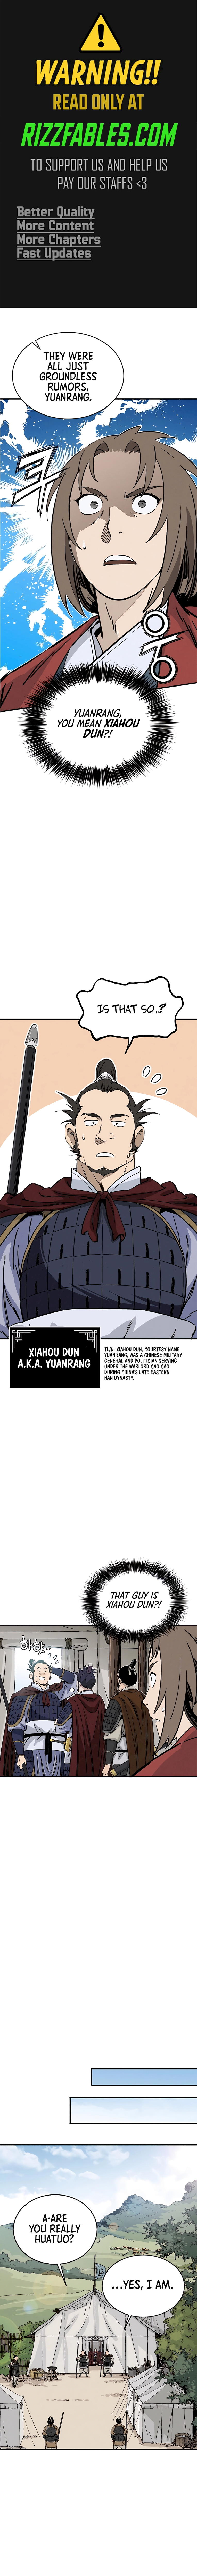 I Reincarnated as a Legendary Surgeon - Chapter 34109 - Image 1